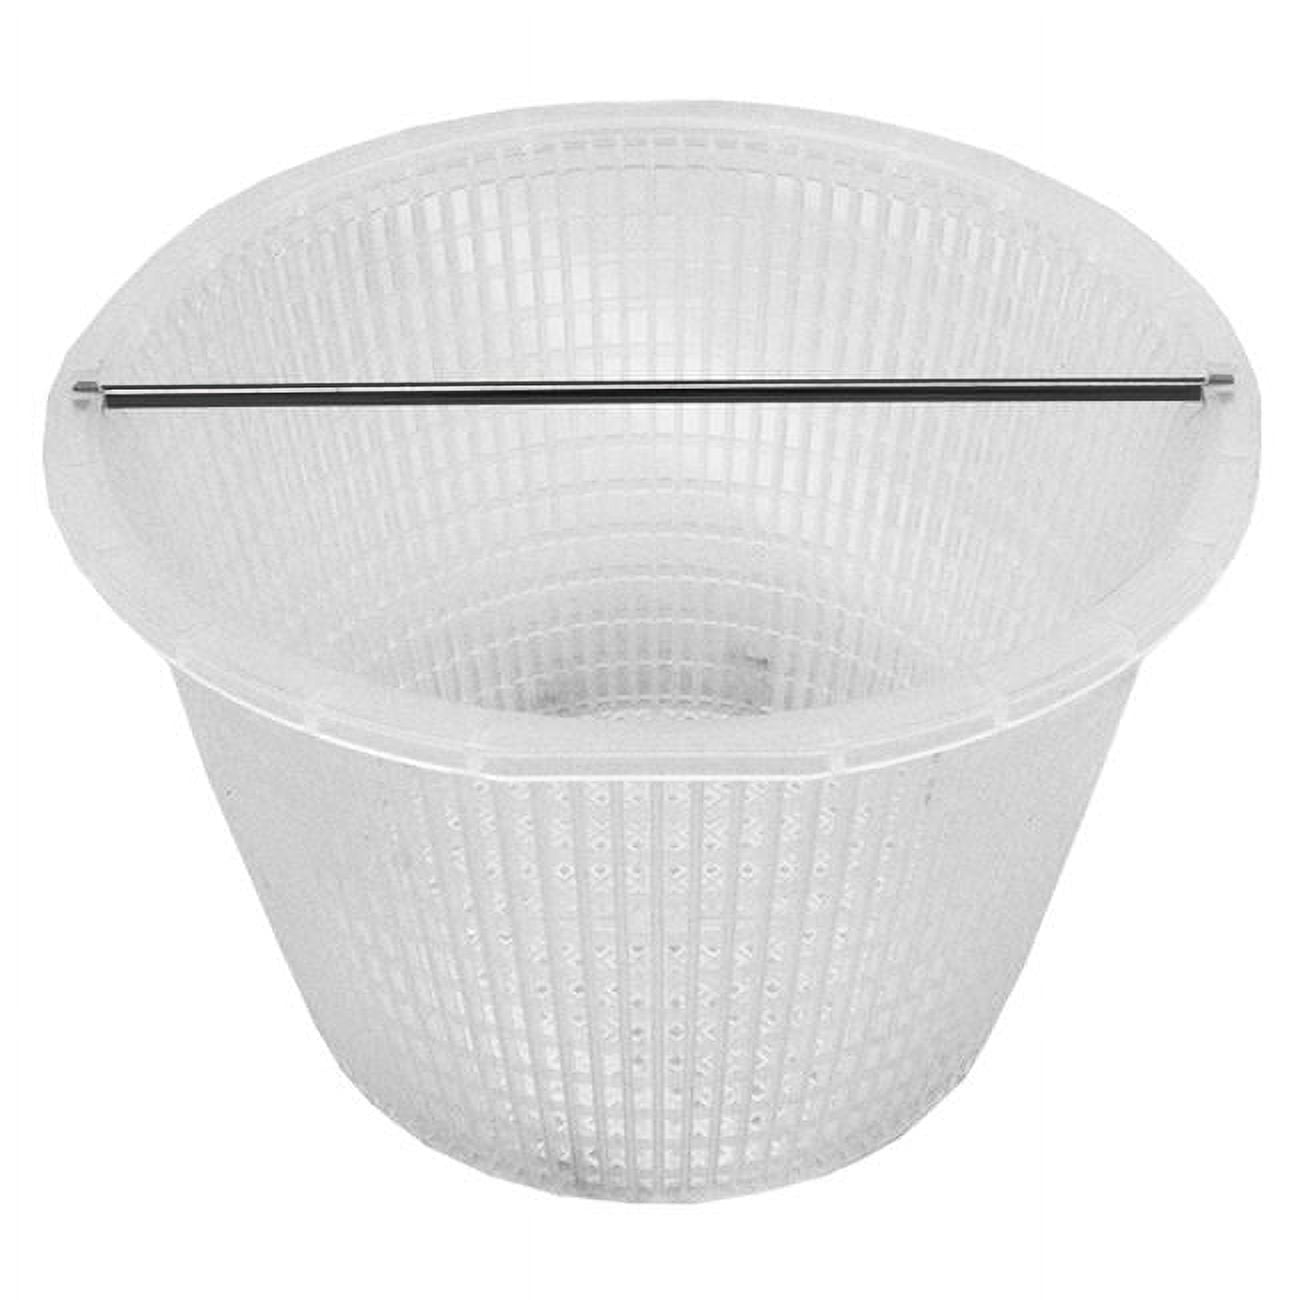 Picture of Aquastar Pool SK6 Skimmer Basket with Stainless Steel Handle